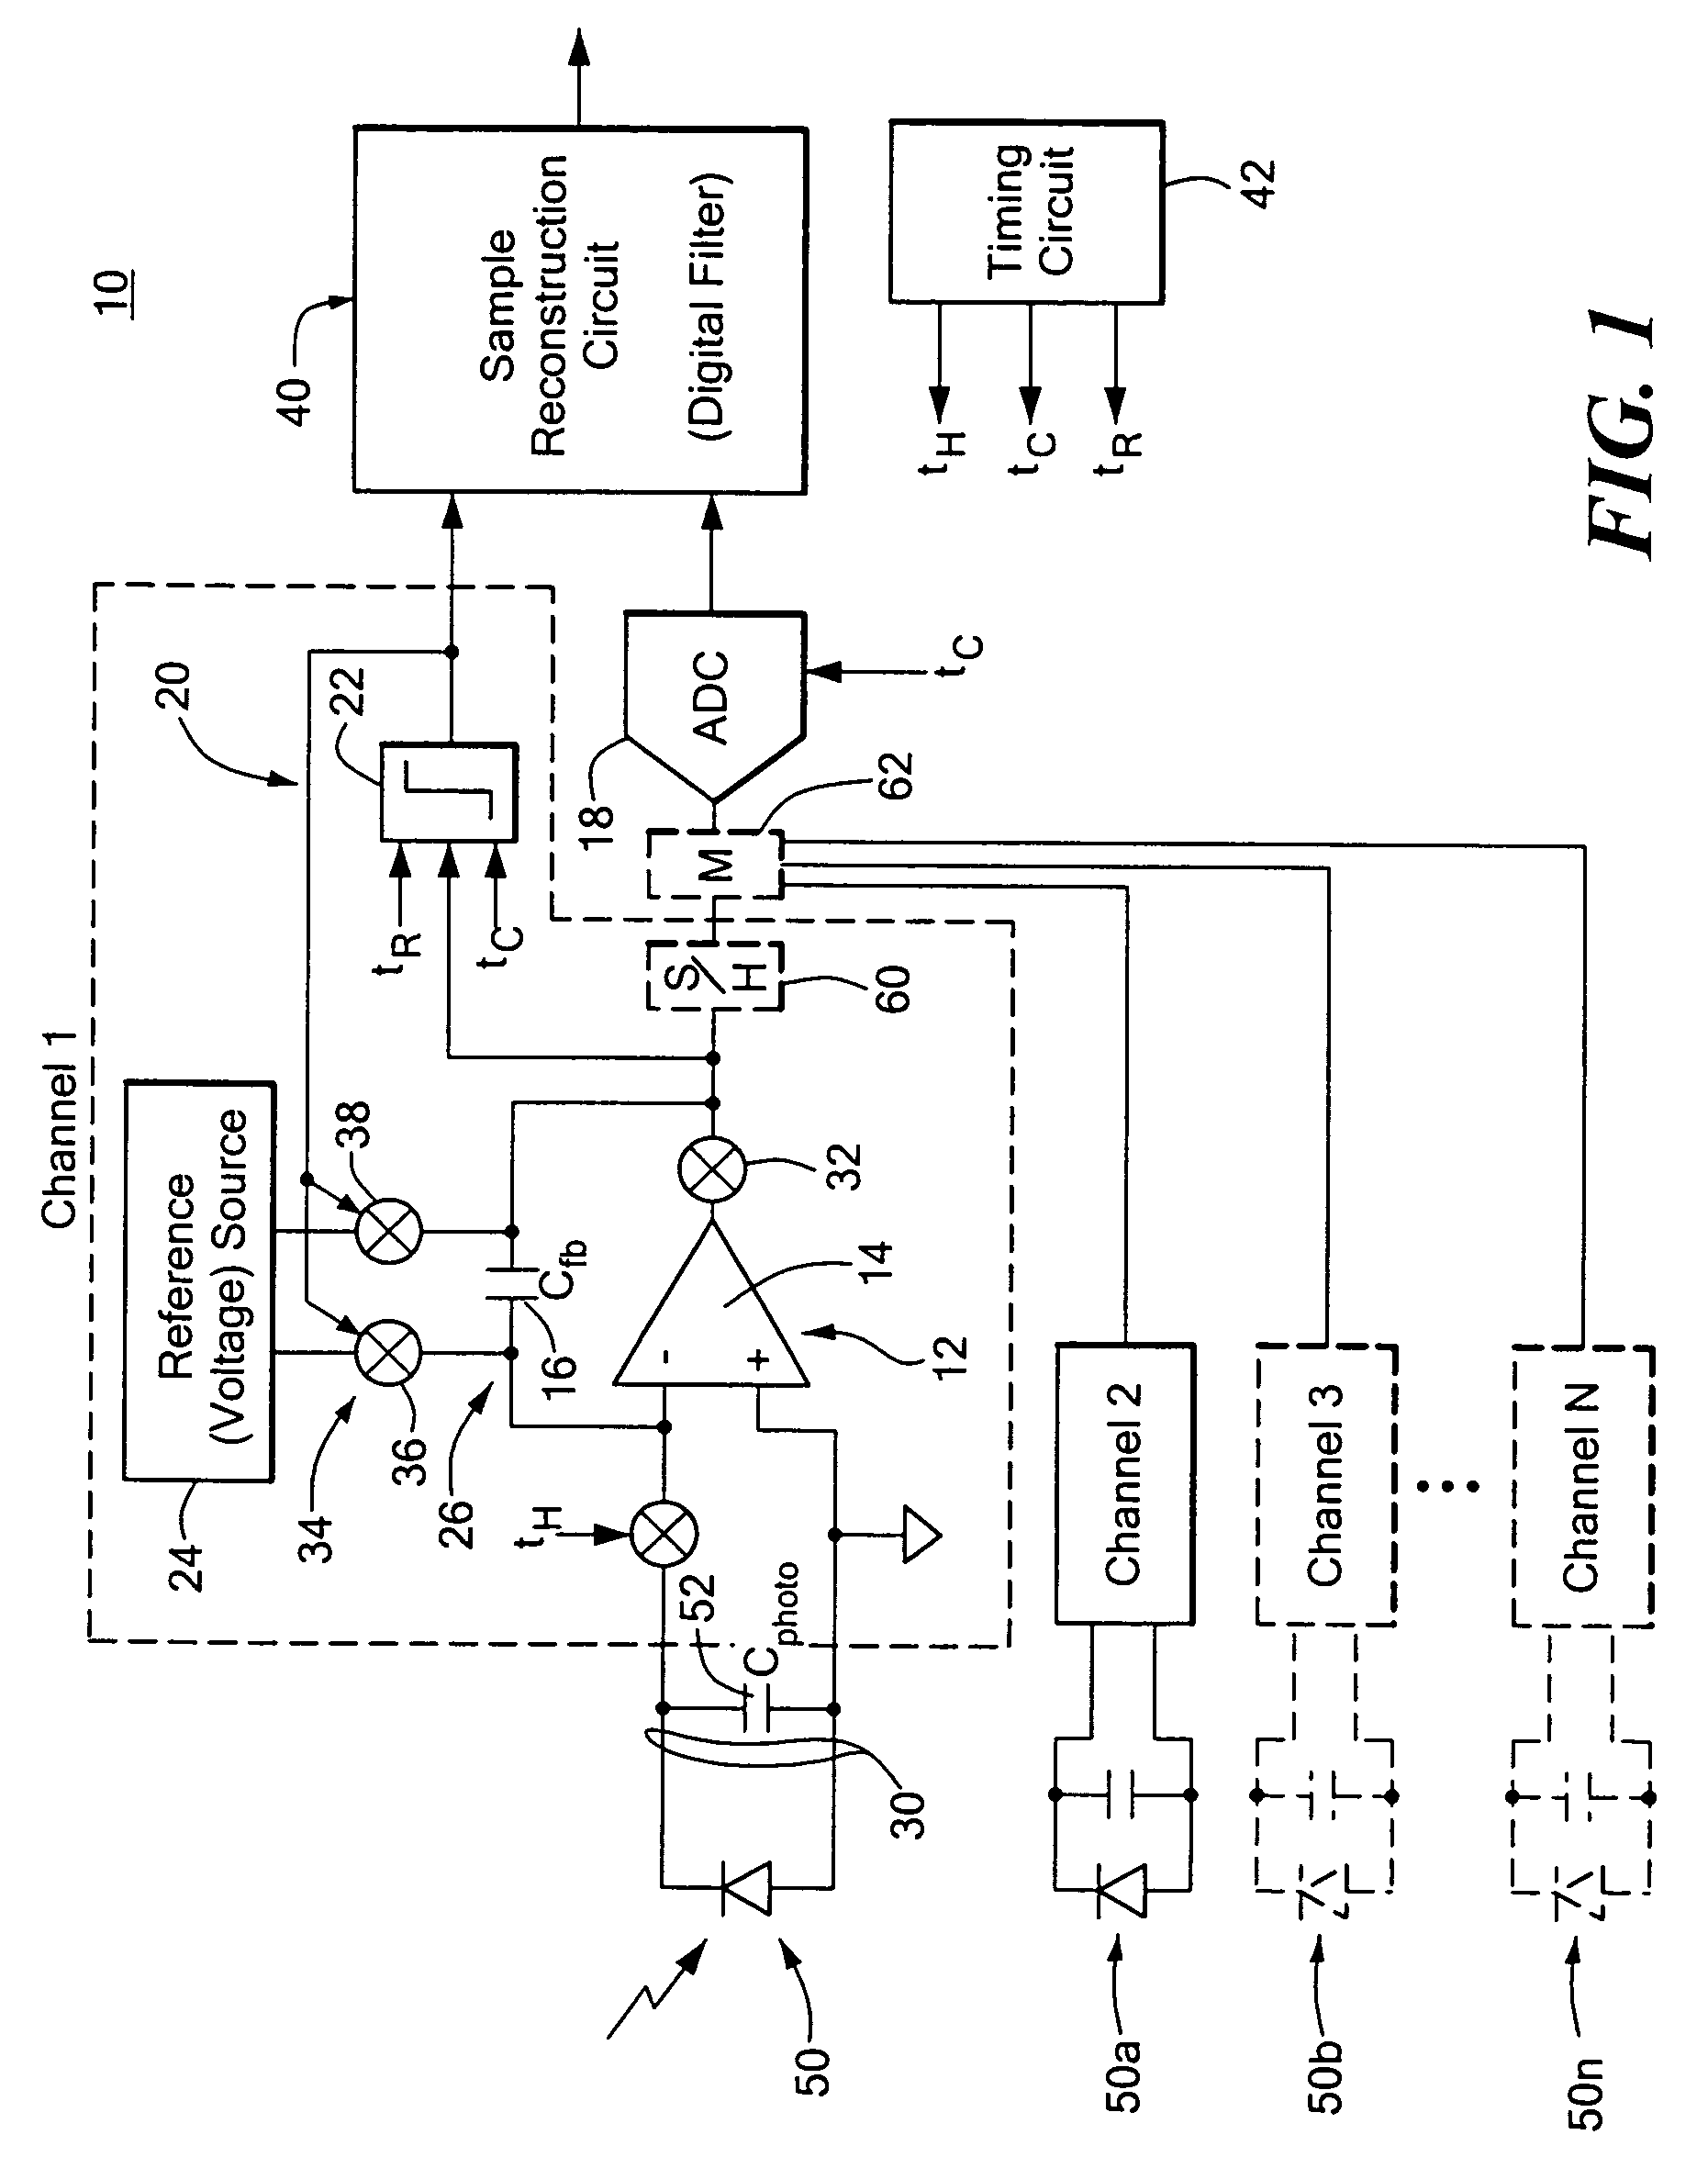 Accurate low noise analog to digital converter system